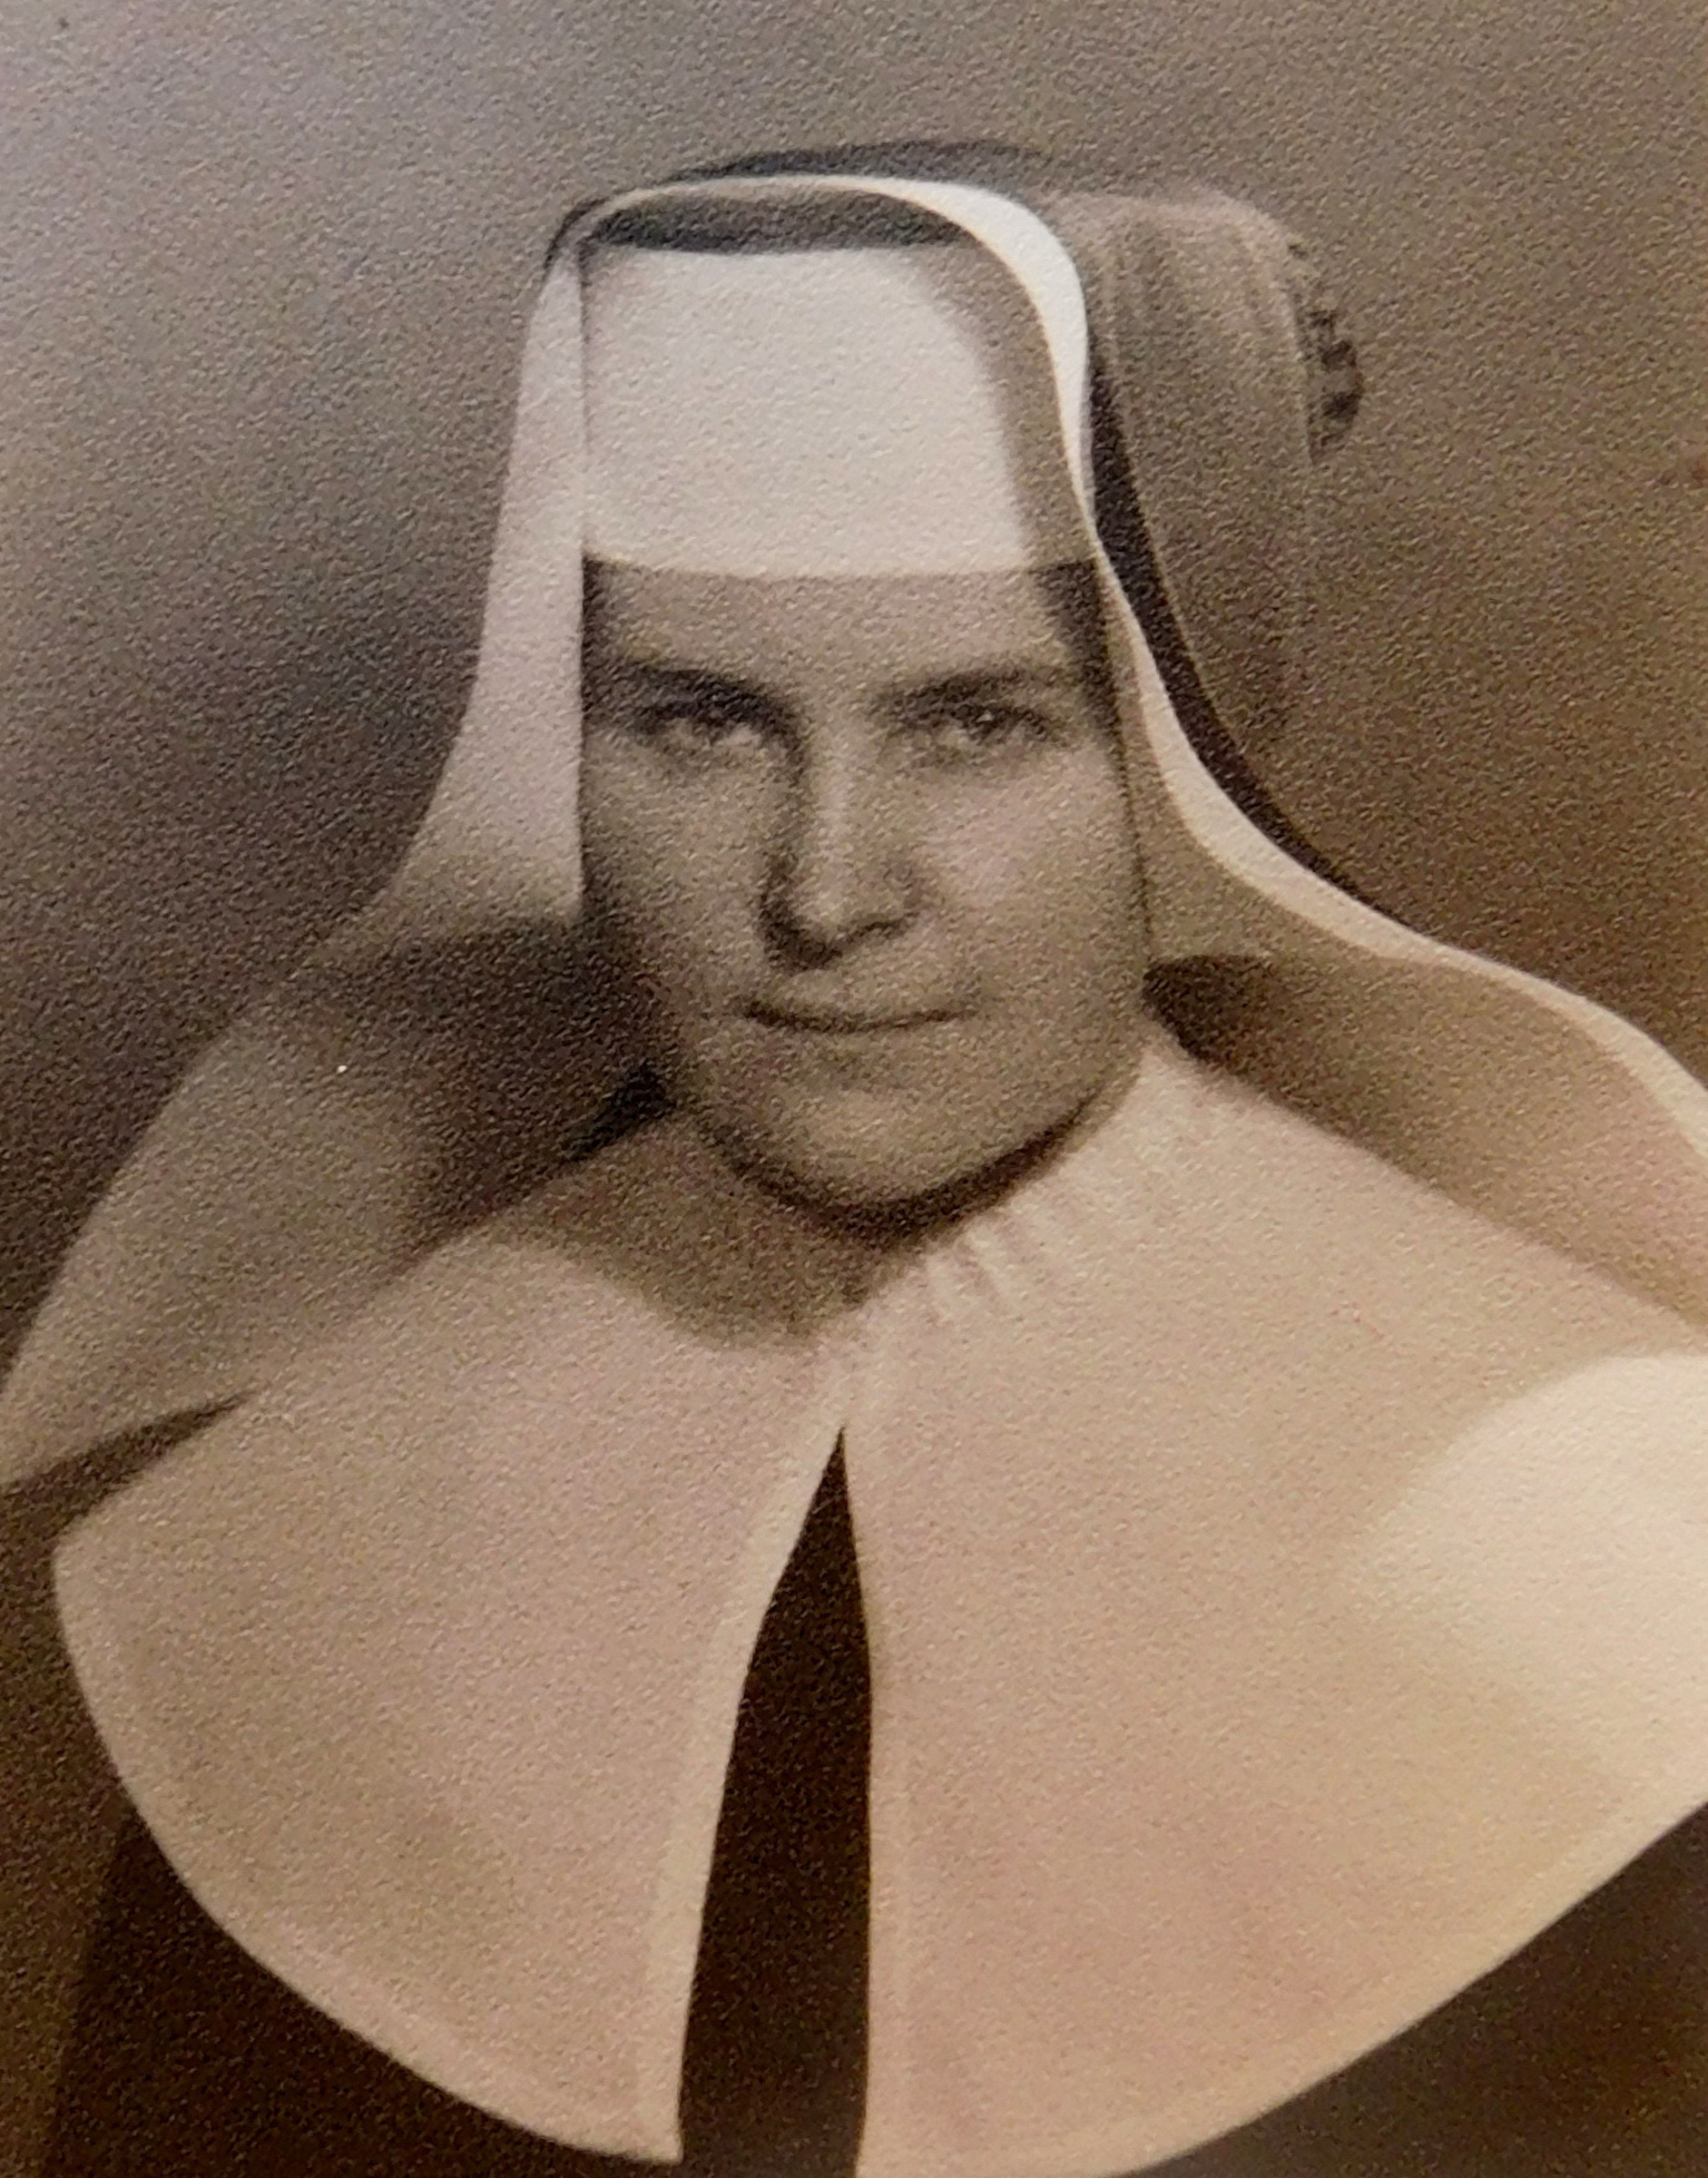 Anna Schreiber in the Congregation of the Sisters of Mercy of St. Charles Borromeo. Photographed in Trutnov, where the witness worked in a factory Texlen.